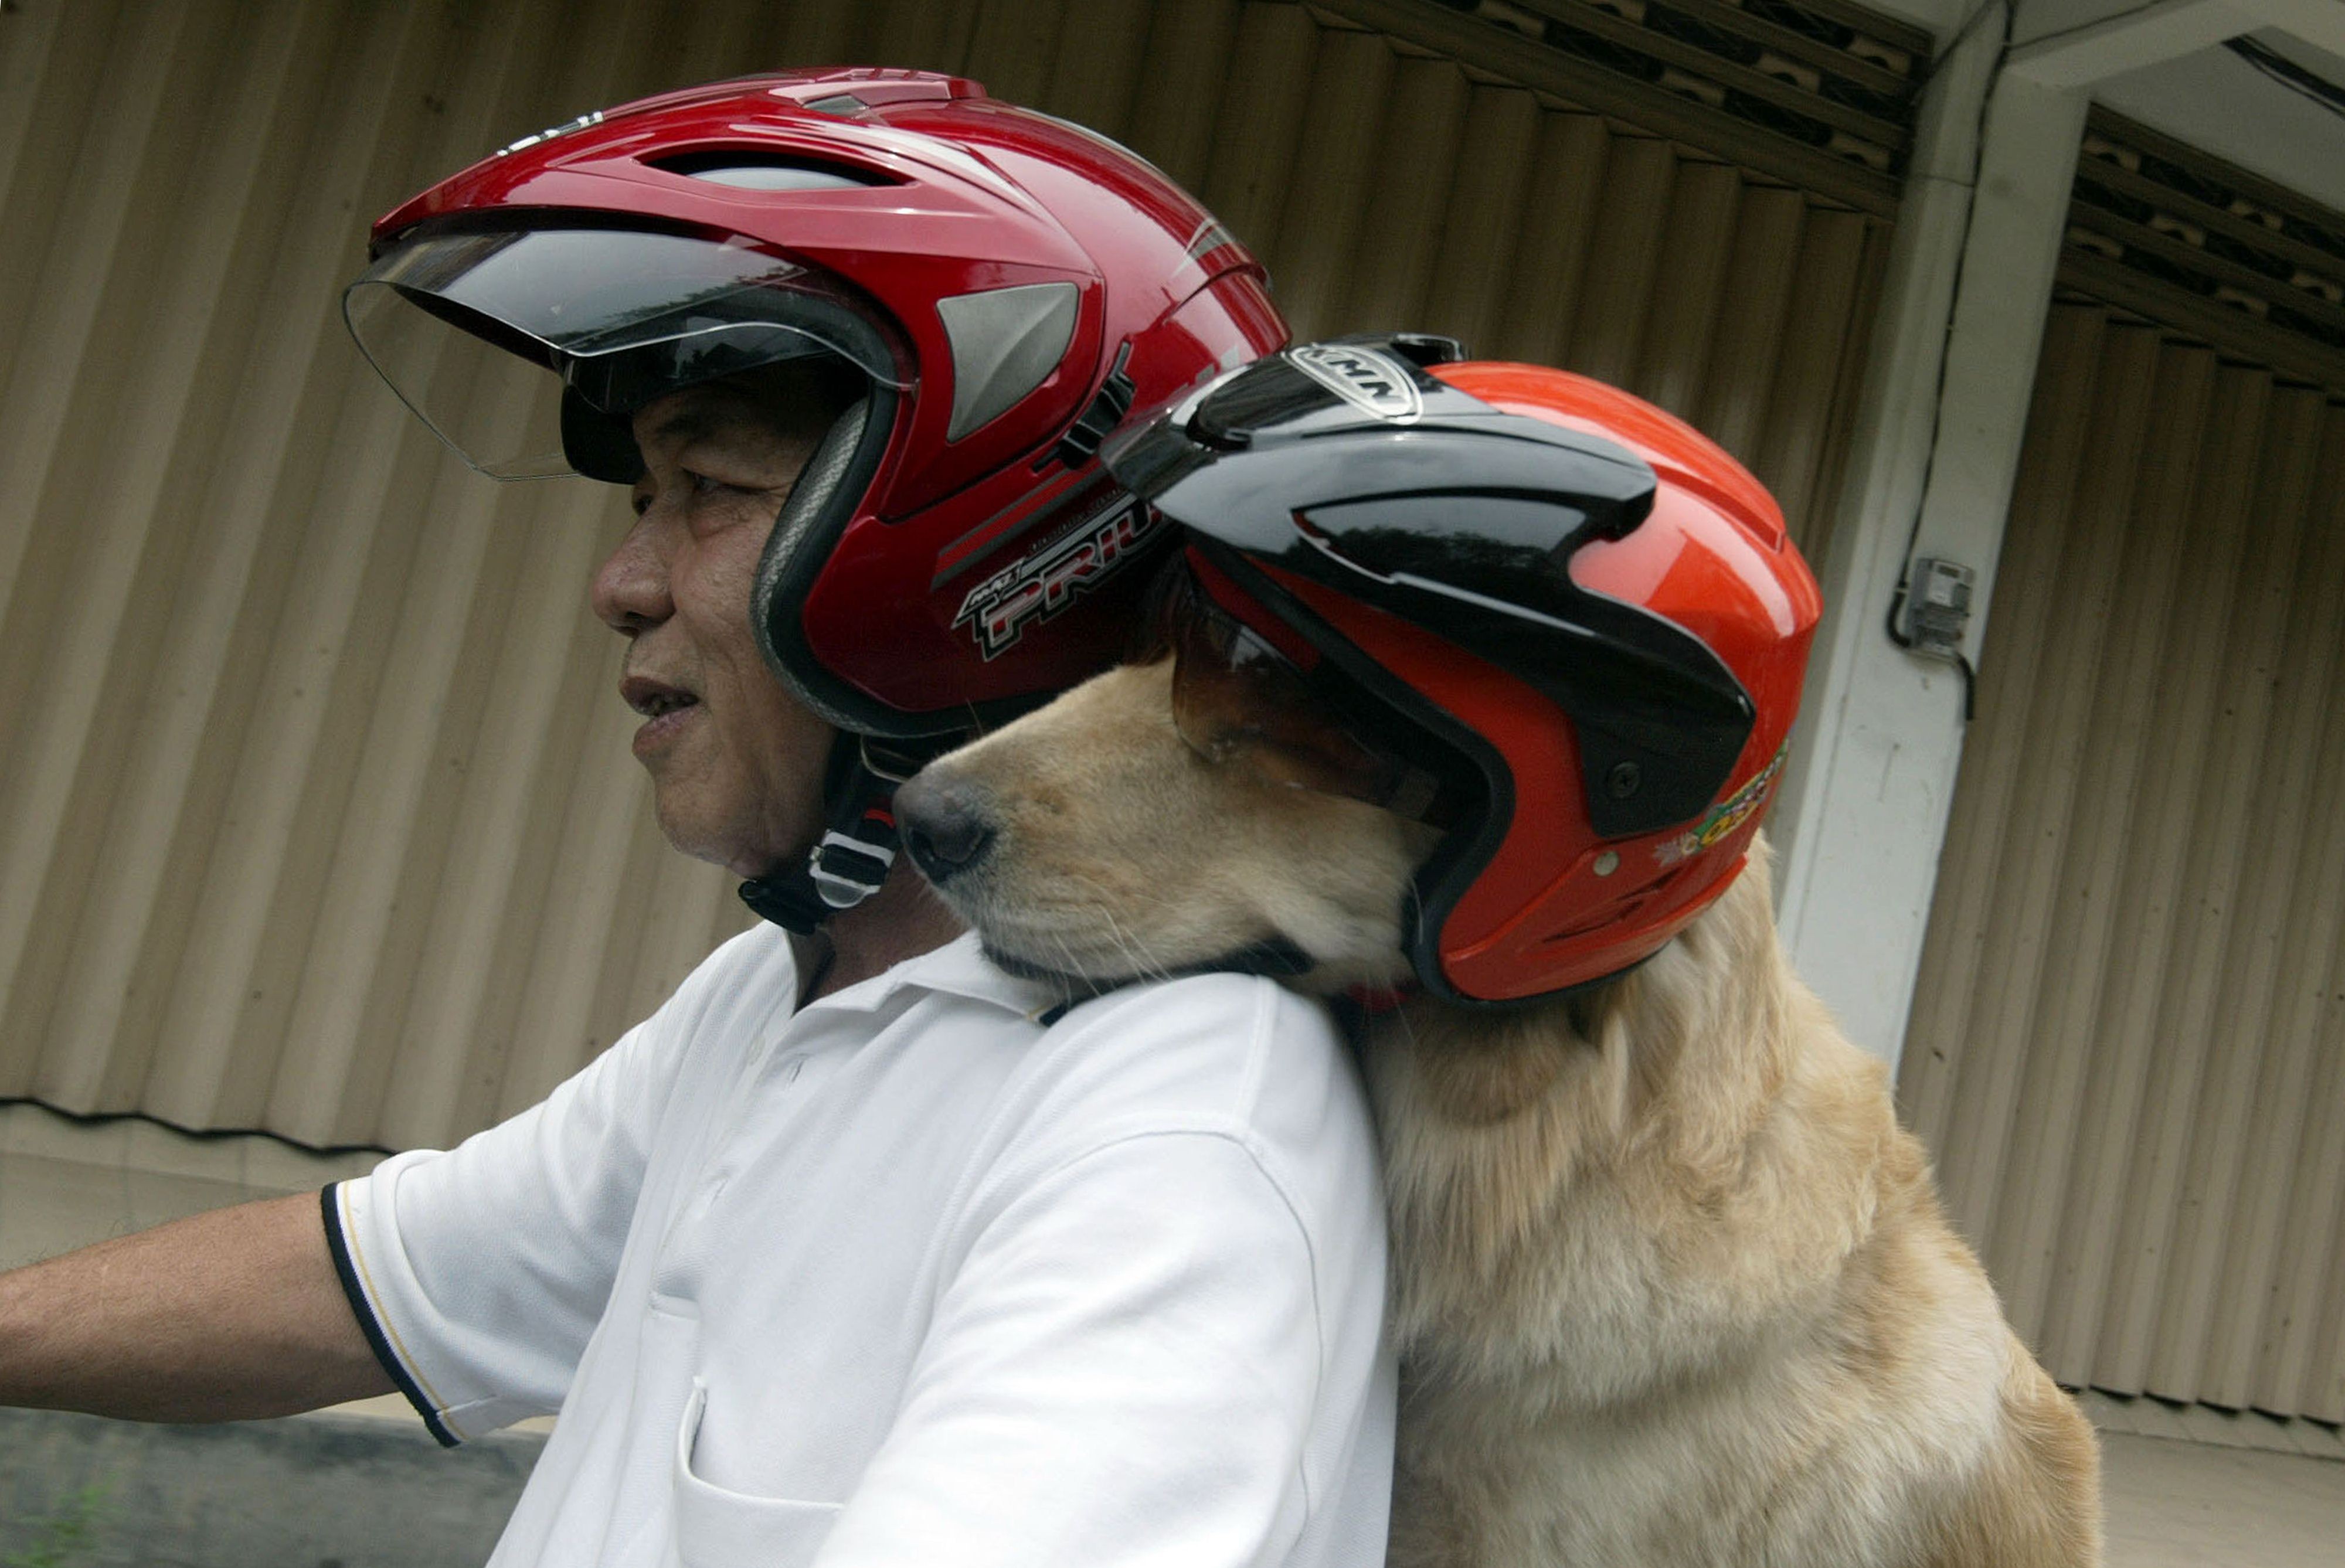 As incomes rise and pet ownership becomes more common, Indonesians are re-evaluating their relationship with animals